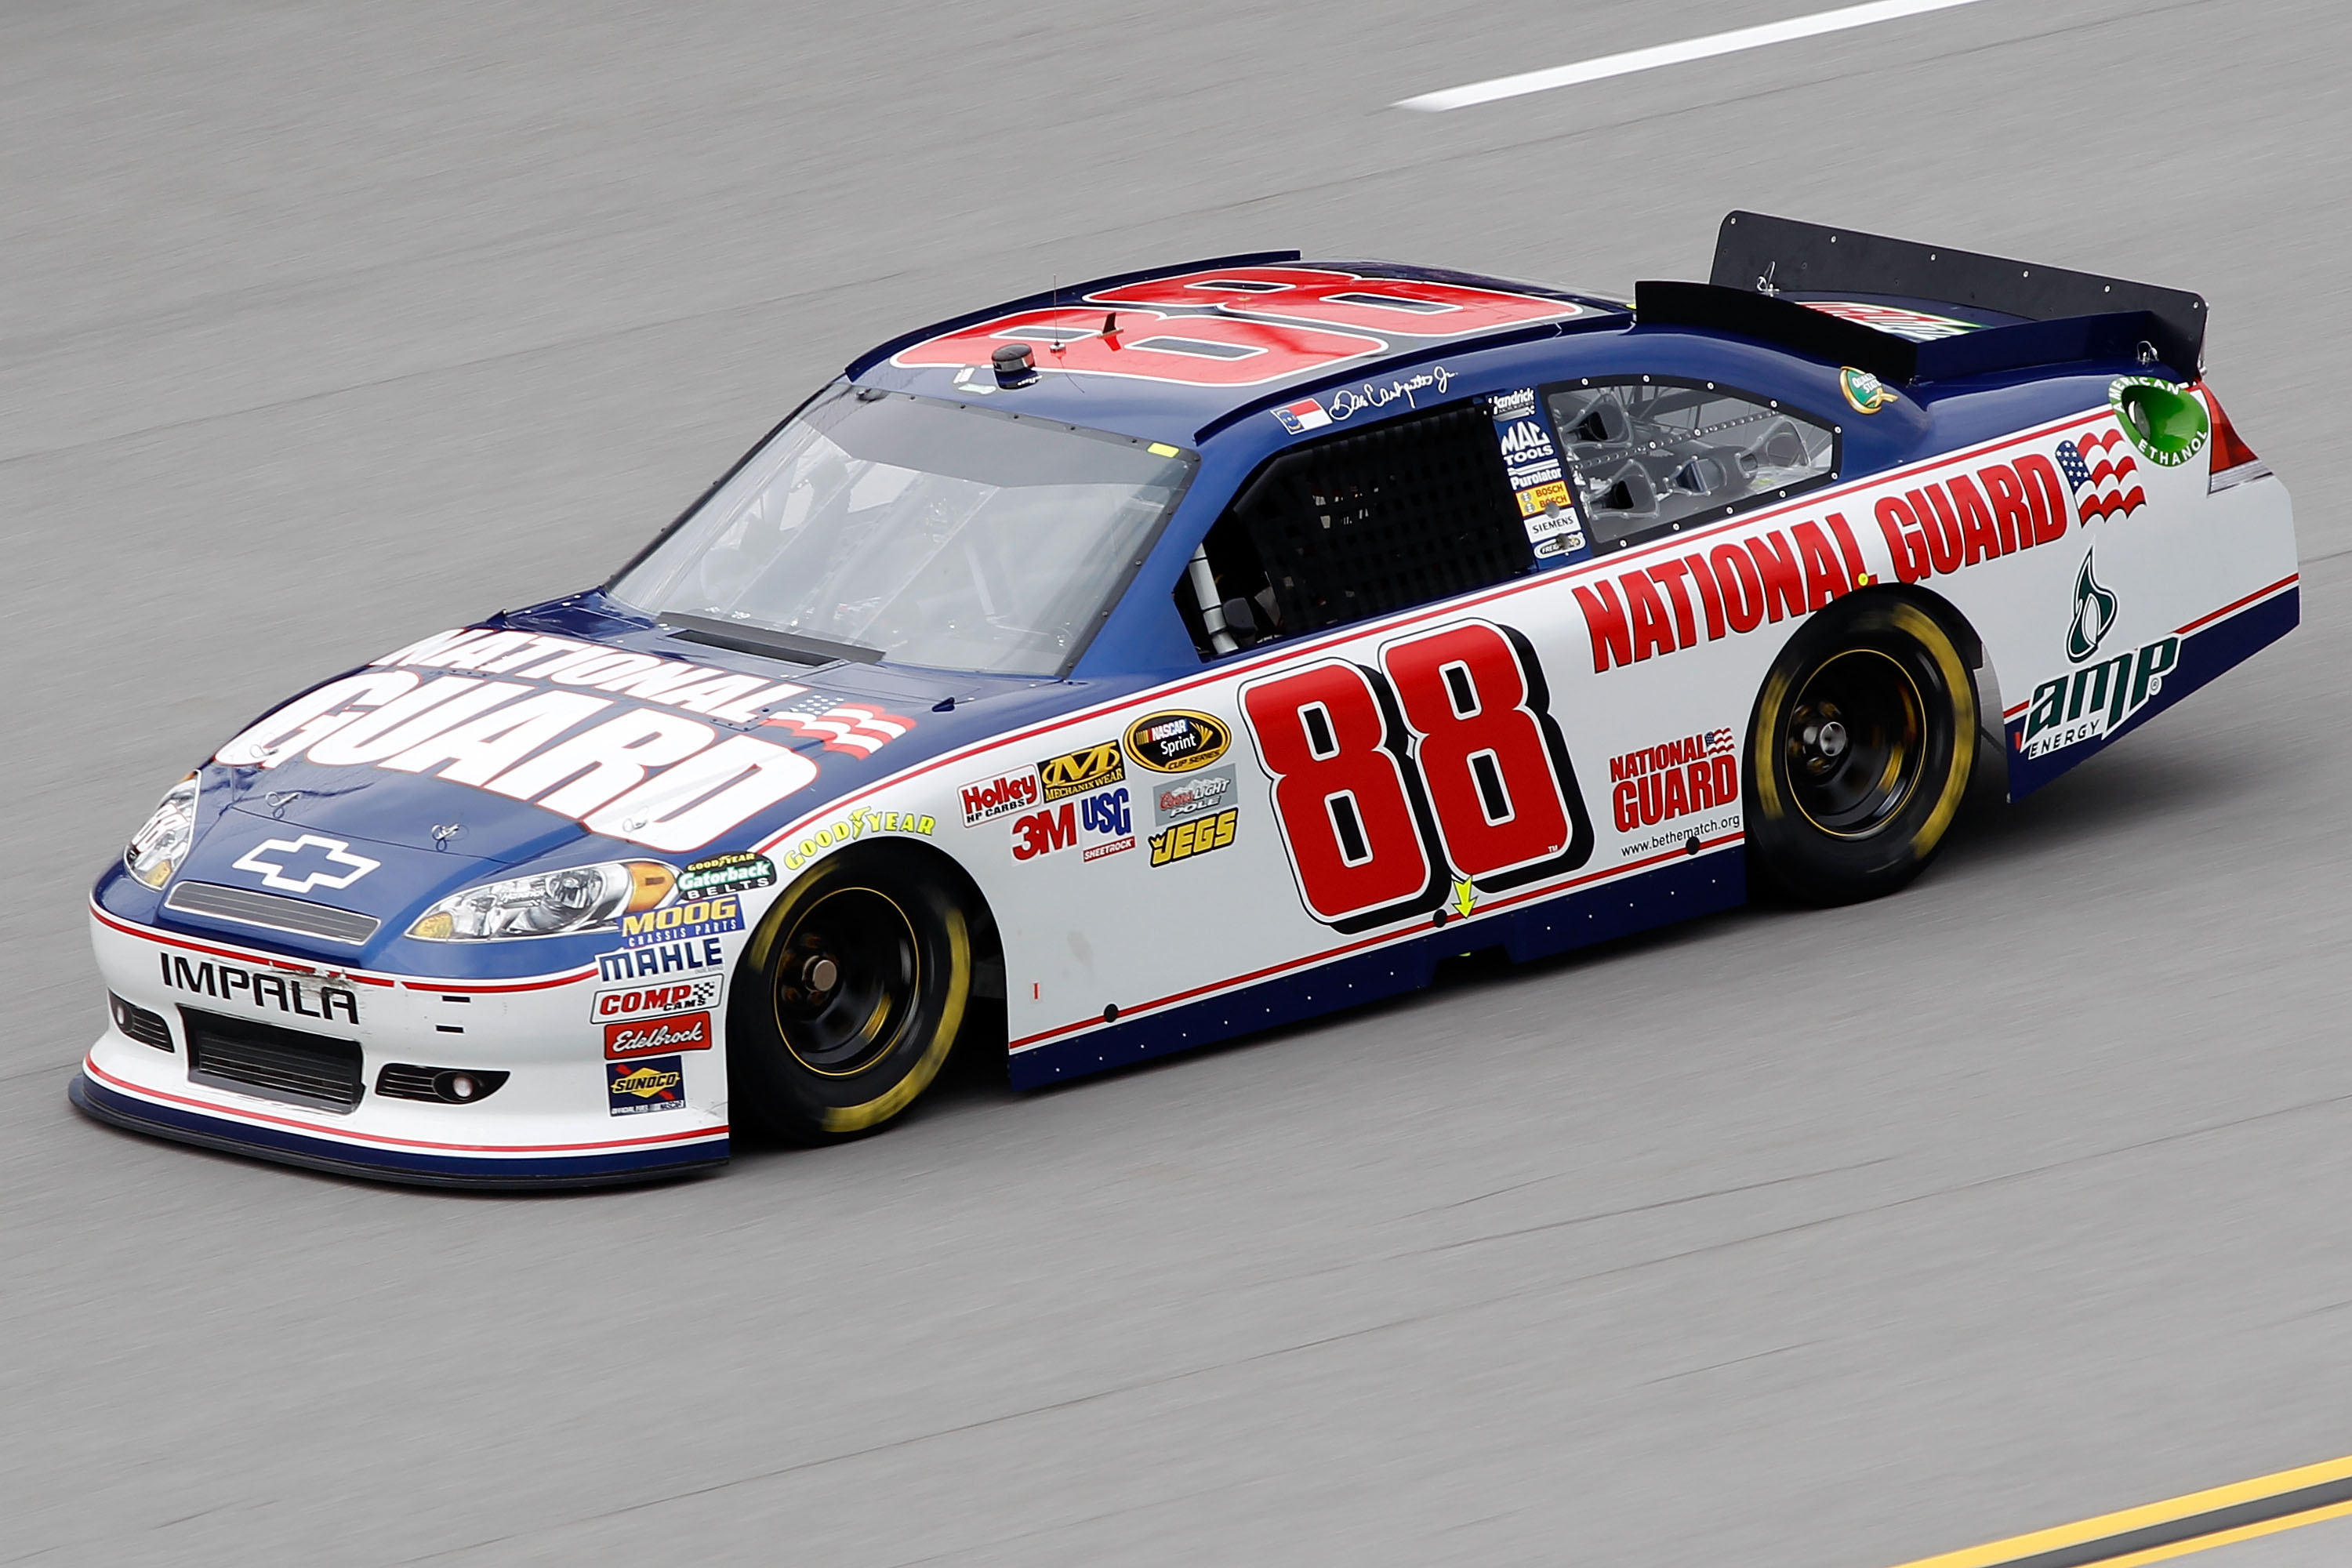 TALLADEGA, AL - APRIL 15:  Dale Earnhardt Jr., drives the #88 National Guard/AMP Energy Chevrolet during practice for the NASCAR Sprint Cup Series Aaron's 499 at Talladega Superspeedway on April 15, 2011 in Talladega, Alabama.  (Photo by Todd Warshaw/Gett